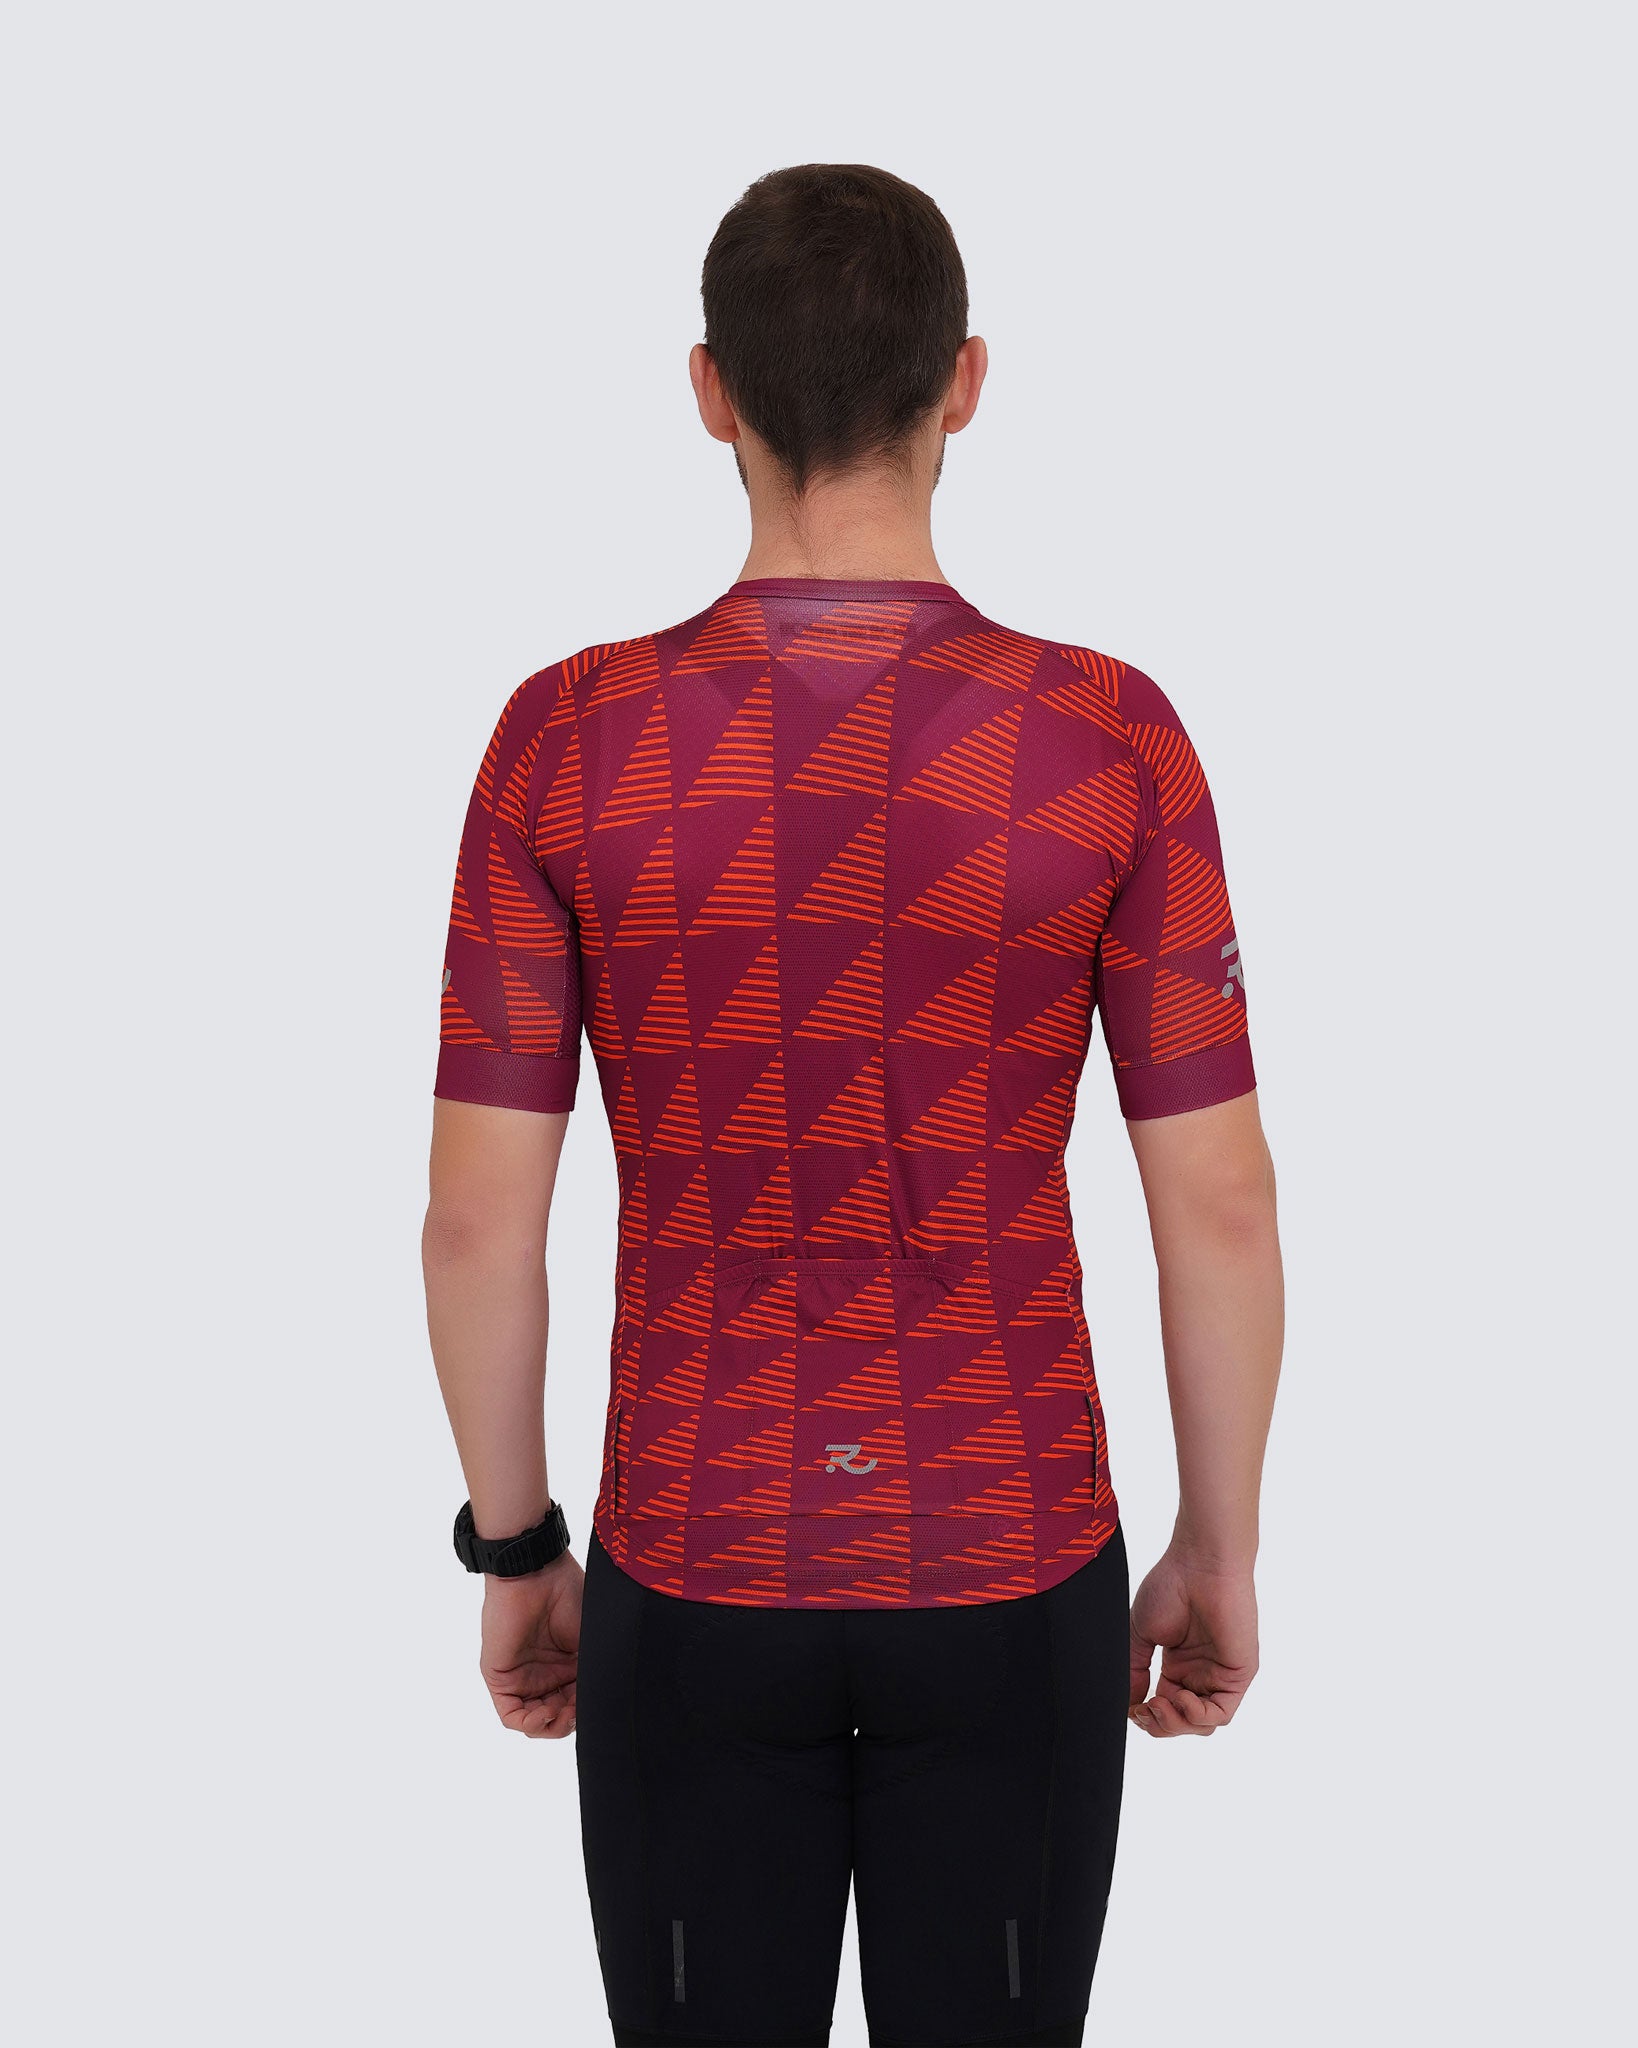 back view of red jersey for men with diamond pattern